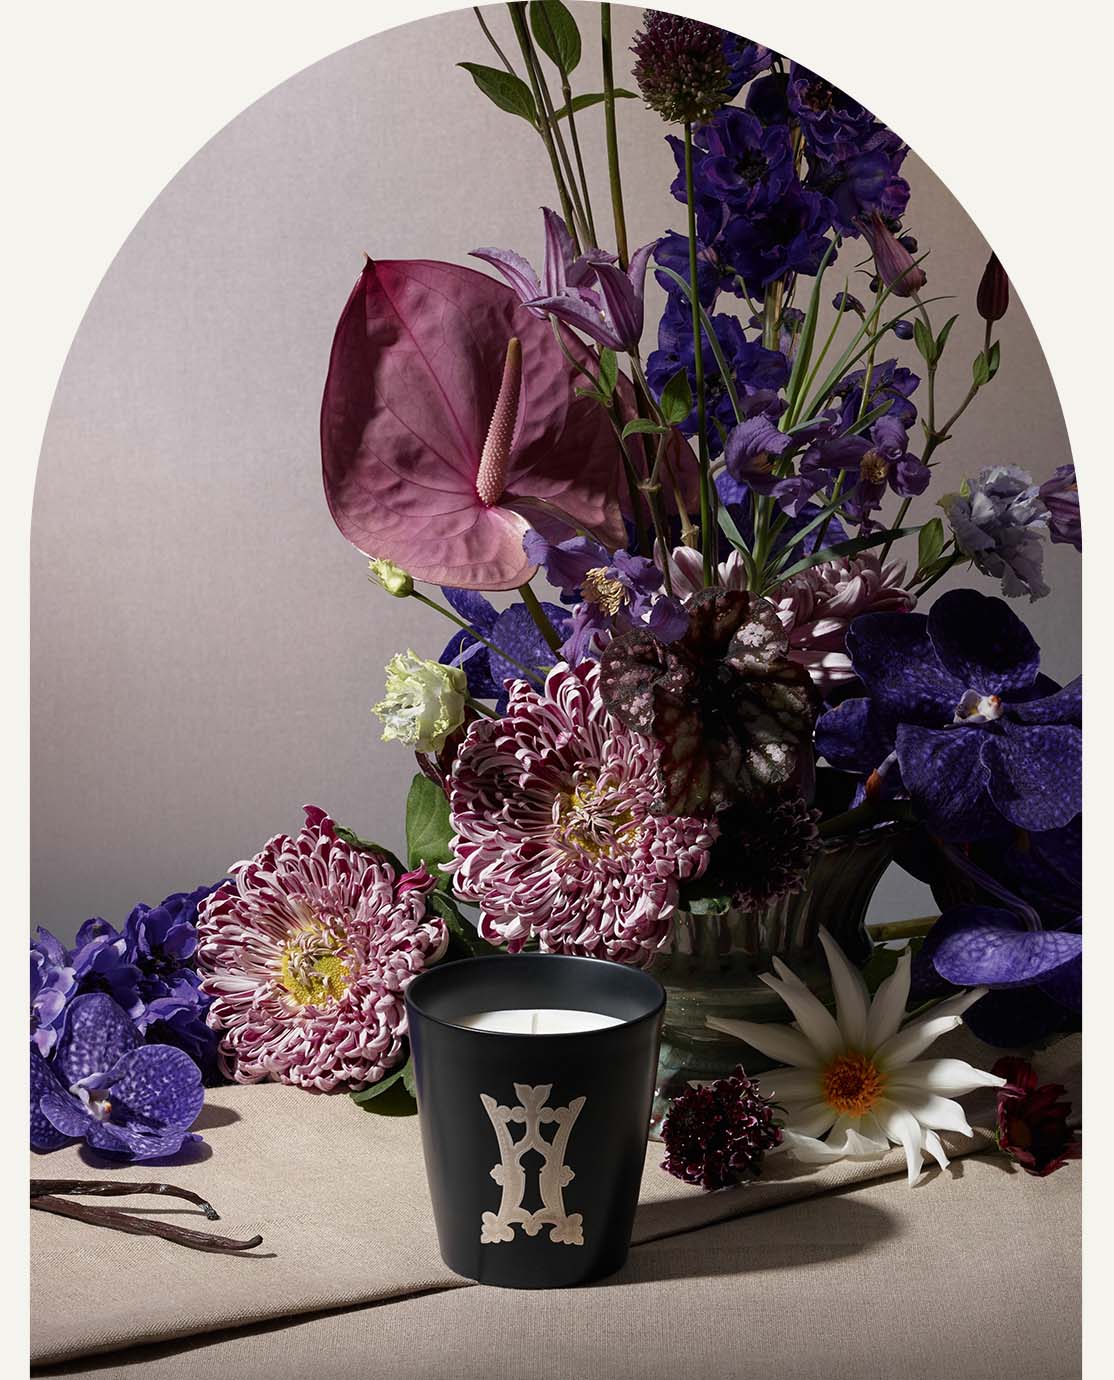 A candle in a black vessel sits in front of a bouquet of purple flowers